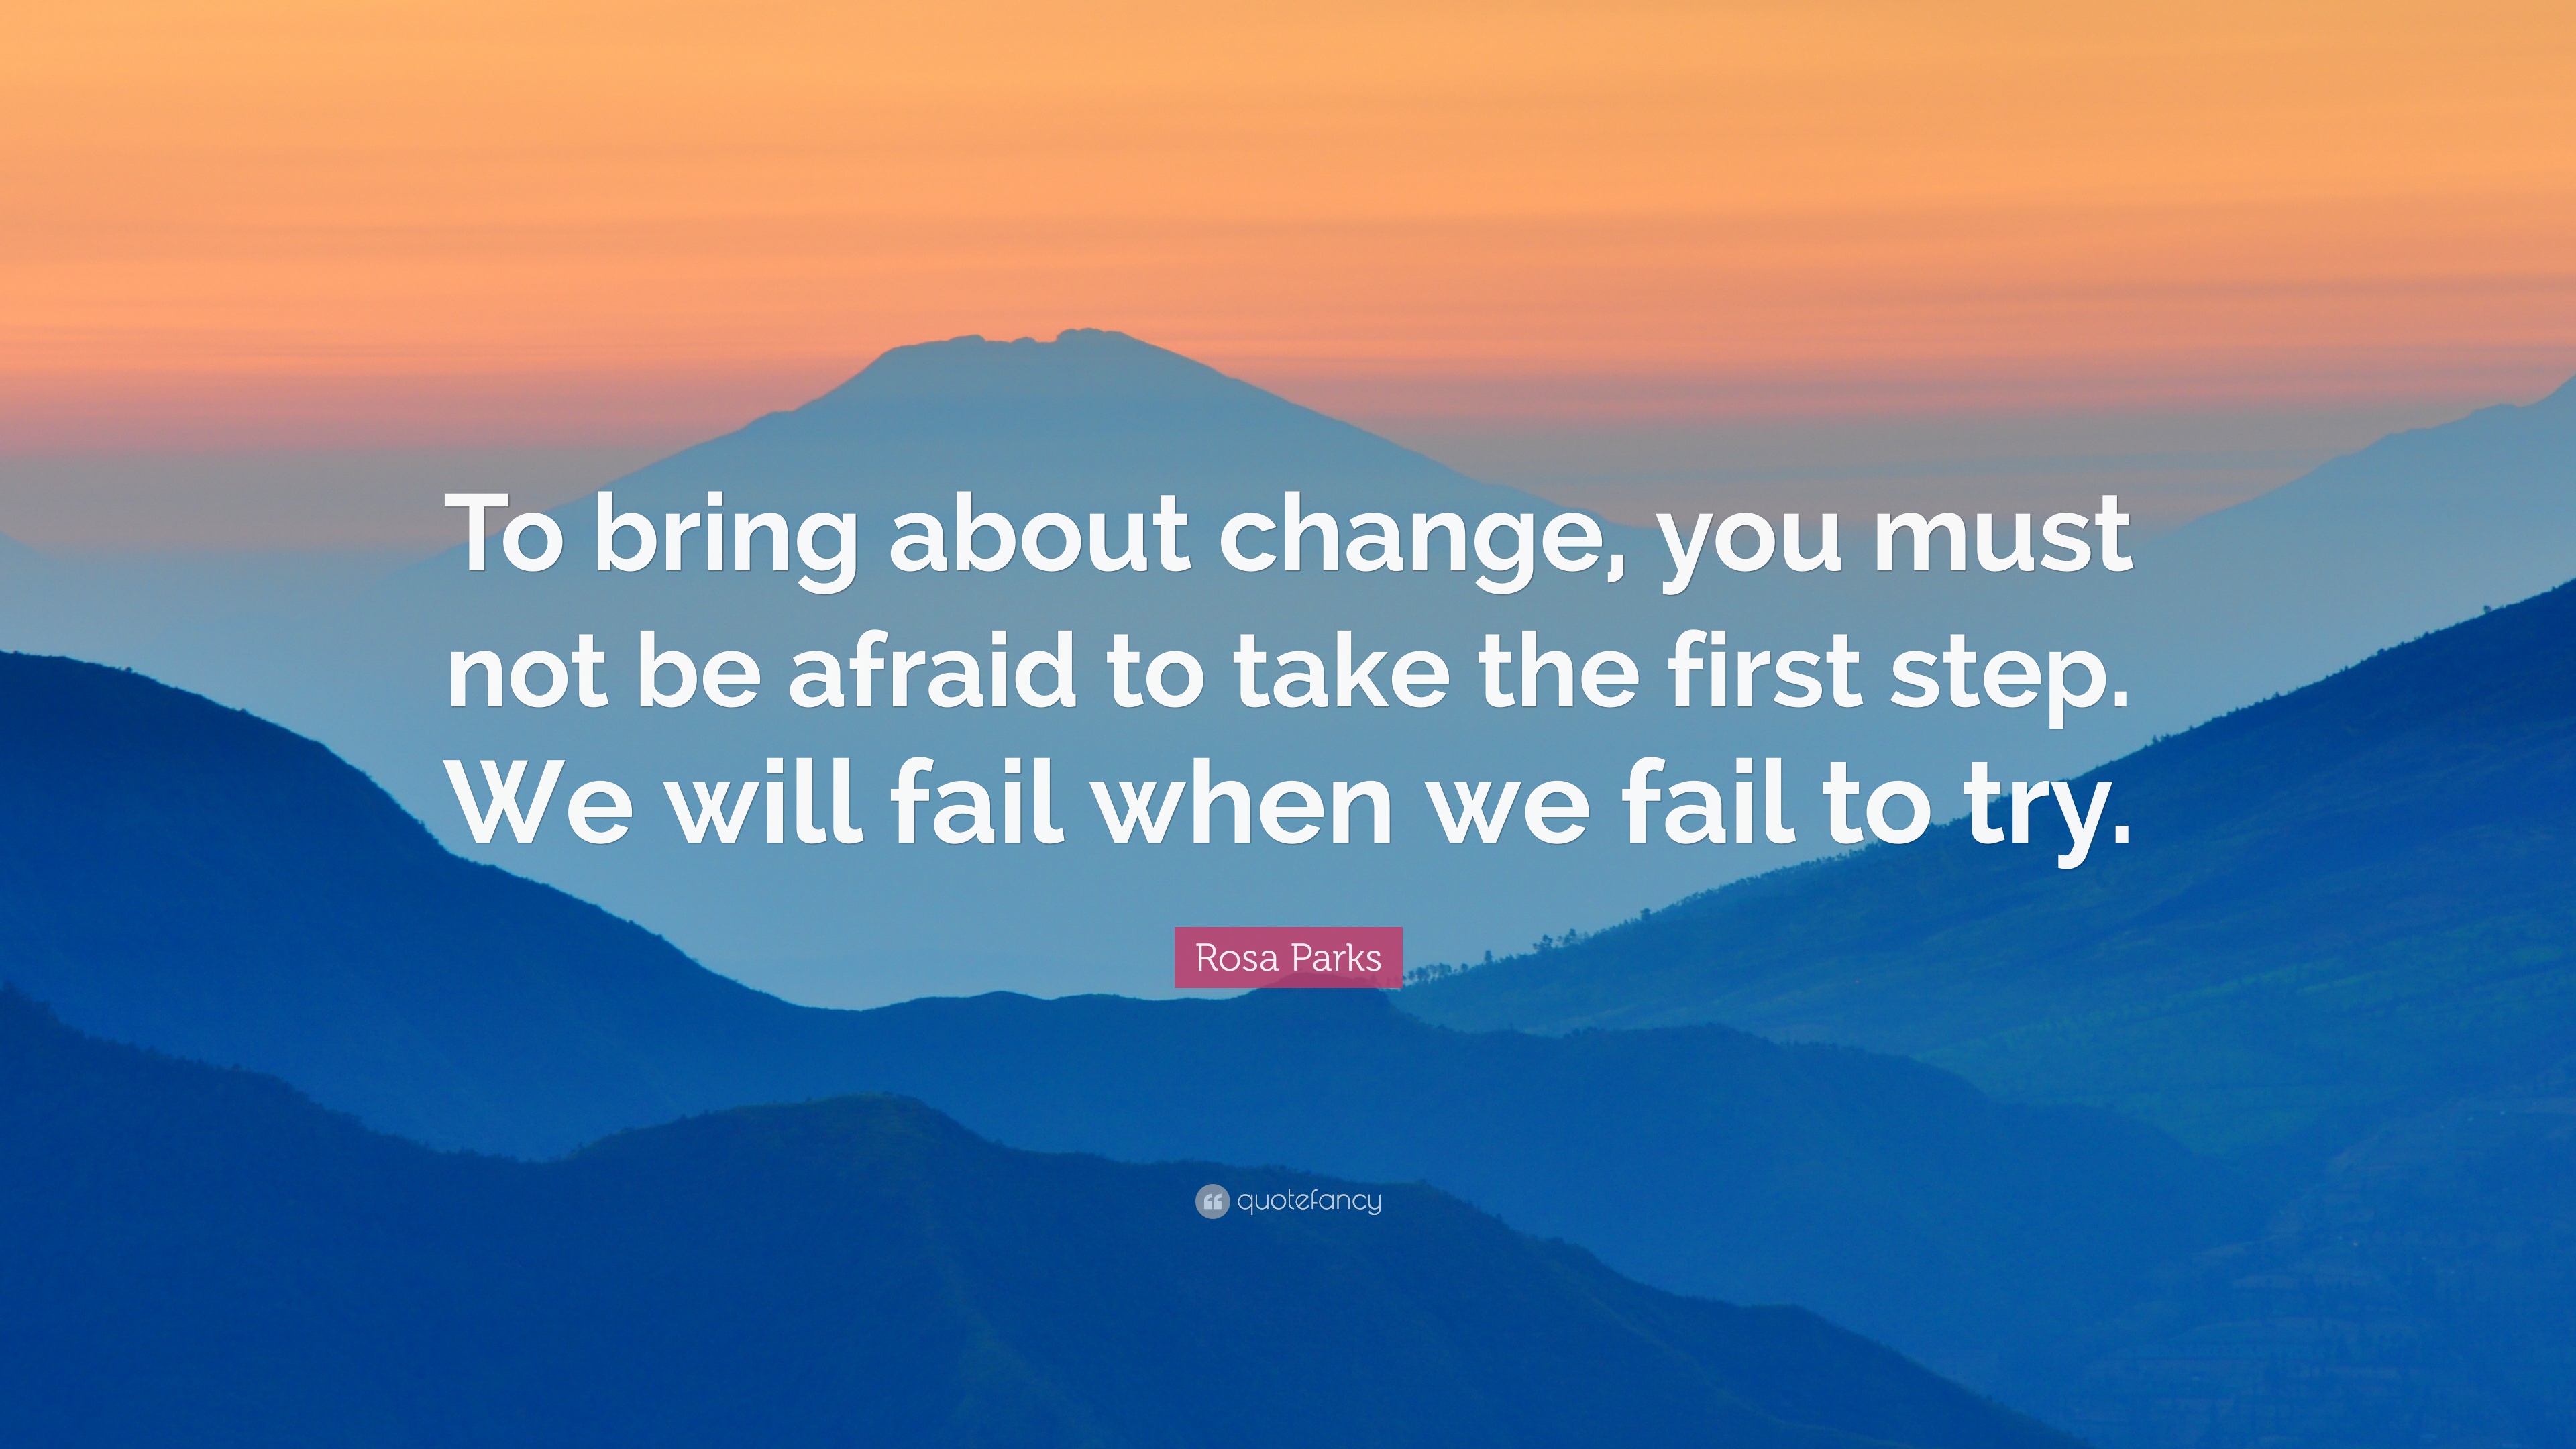 Rosa Parks Quote: “To bring about change, you must not be afraid to